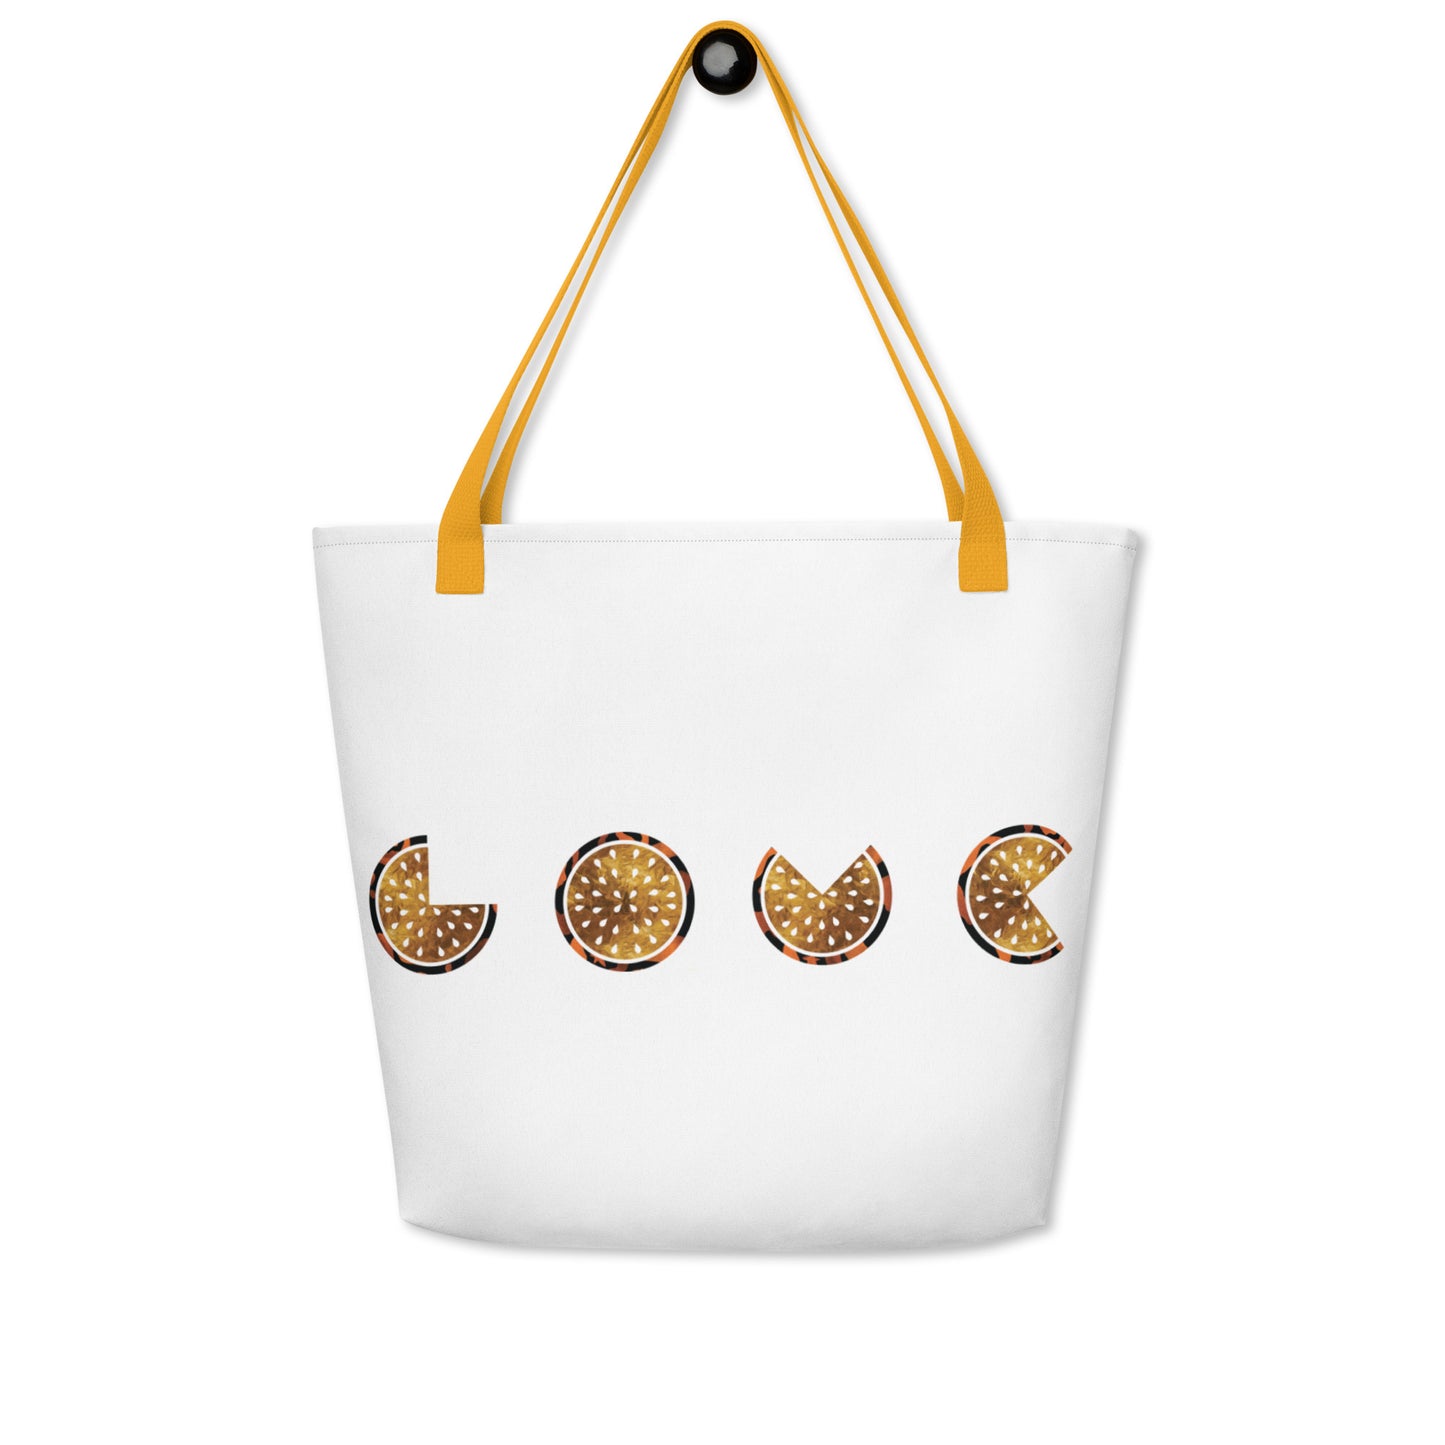 Large Beach Tote - Moon Melons